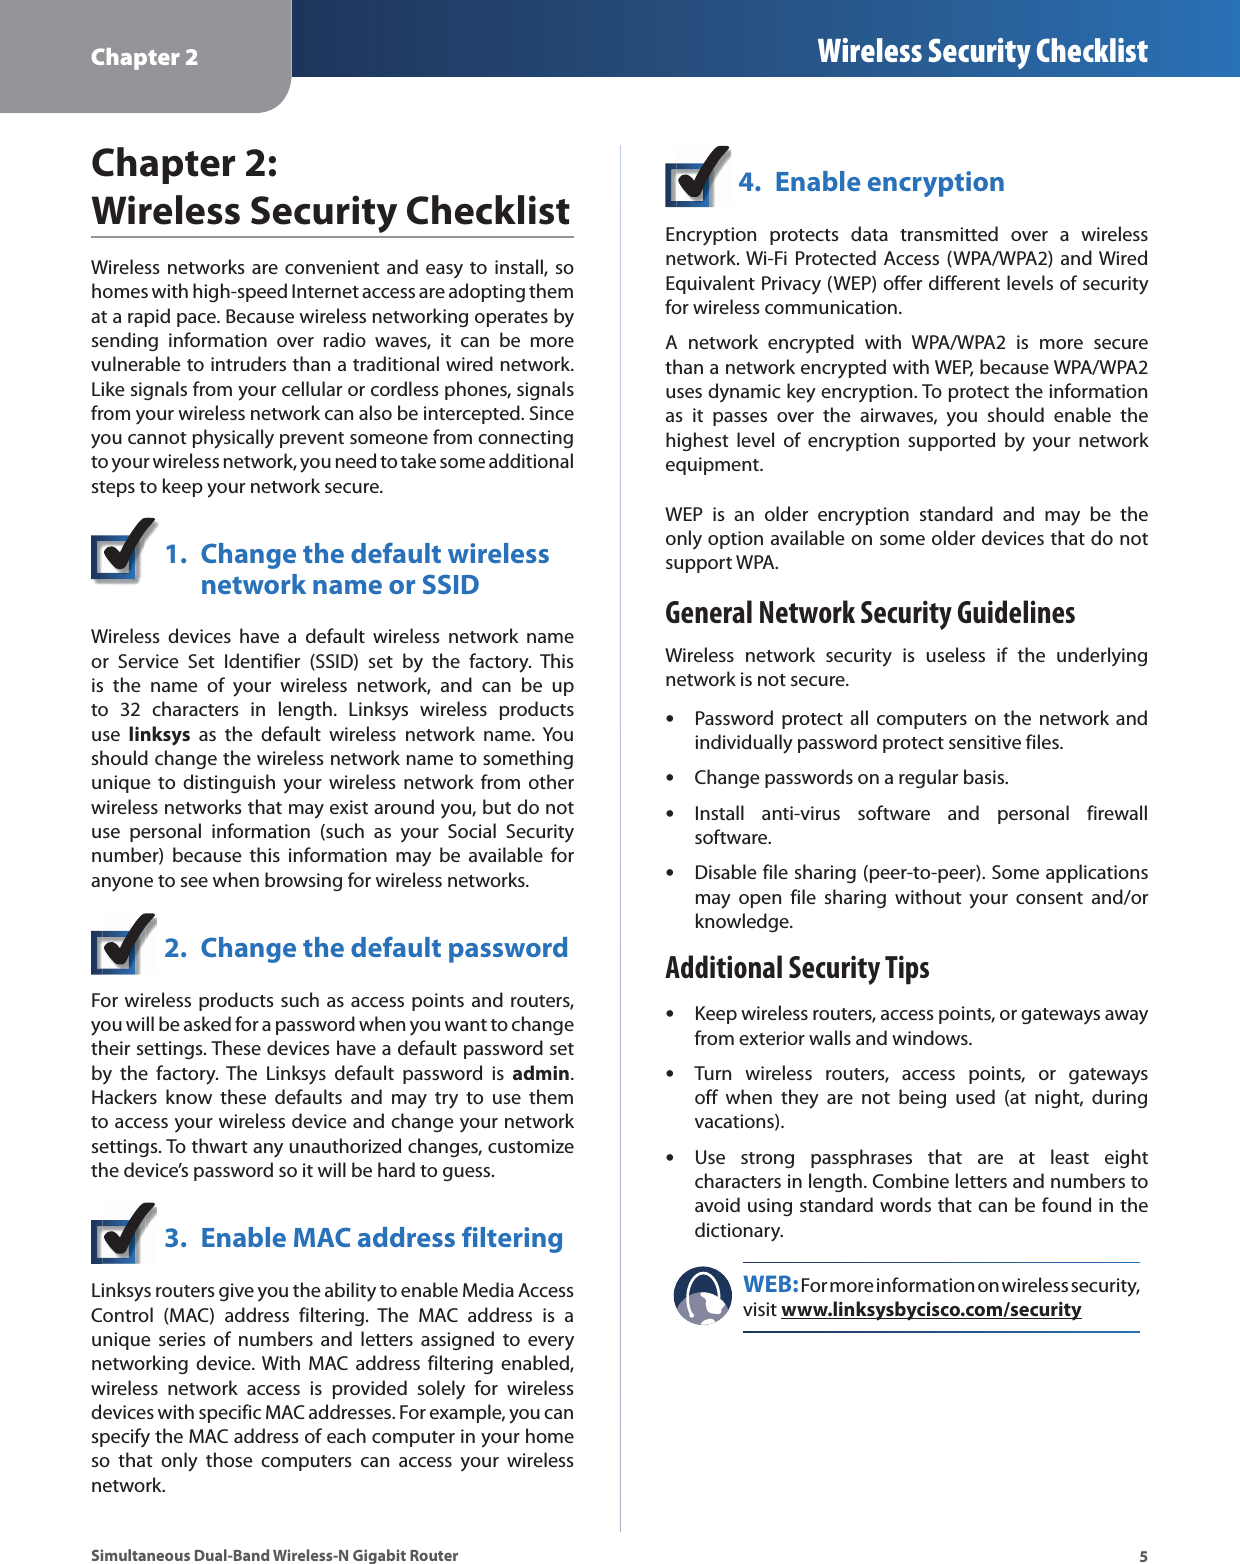 Chapter 2 Wireless Security Checklist5Simultaneous Dual-Band Wireless-N Gigabit RouterChapter 2: Wireless Security ChecklistWireless networks are convenient and easy to install, so homes with high-speed Internet access are adopting them at a rapid pace. Because wireless networking operates by sending information over radio waves, it can be more vulnerable to intruders than a traditional wired network. Like signals from your cellular or cordless phones, signals from your wireless network can also be intercepted. Since you cannot physically prevent someone from connecting to your wireless network, you need to take some additional steps to keep your network secure. 1.  Change the default wireless  network name or SSIDWireless devices have a default wireless network name or Service Set Identifier (SSID) set by the factory. This is the name of your wireless network, and can be up to 32 characters in length. Linksys wireless products use  linksys as the default wireless network name. You should change the wireless network name to something unique to distinguish your wireless network from other wireless networks that may exist around you, but do not use personal information (such as your Social Security number) because this information may be available for anyone to see when browsing for wireless networks. 2.  Change the default passwordFor wireless products such as access points and routers, you will be asked for a password when you want to change their settings. These devices have a default password set by the factory. The Linksys default password is admin. Hackers know these defaults and may try to use them to access your wireless device and change your network settings. To thwart any unauthorized changes, customize the device’s password so it will be hard to guess.3.  Enable MAC address filteringLinksys routers give you the ability to enable Media Access Control (MAC) address filtering. The MAC address is a unique series of numbers and letters assigned to every networking device. With MAC address filtering enabled, wireless network access is provided solely for wireless devices with specific MAC addresses. For example, you can specify the MAC address of each computer in your home so that only those computers can access your wireless network. 4.  Enable encryptionEncryption protects data transmitted over a wireless network. Wi-Fi Protected Access (WPA/WPA2) and Wired Equivalent Privacy (WEP) offer different levels of security for wireless communication.A network encrypted with WPA/WPA2 is more secure than a network encrypted with WEP, because WPA/WPA2 uses dynamic key encryption. To protect the information as it passes over the airwaves, you should enable the highest level of encryption supported by your network equipment. WEP is an older encryption standard and may be the only option available on some older devices that do not support WPA.General Network Security GuidelinesWireless network security is useless if the underlying network is not secure. sPassword protect all computers on the network and individually password protect sensitive files.sChange passwords on a regular basis.sInstall anti-virus software and personal firewall software.sDisable file sharing (peer-to-peer). Some applications may open file sharing without your consent and/or knowledge.Additional Security TipssKeep wireless routers, access points, or gateways away from exterior walls and windows.sTurn wireless routers, access points, or gateways off when they are not being used (at night, during vacations).sUse strong passphrases that are at least eight characters in length. Combine letters and numbers to avoid using standard words that can be found in the dictionary. WEB: For more information on wireless security, visit www.linksysbycisco.com/security